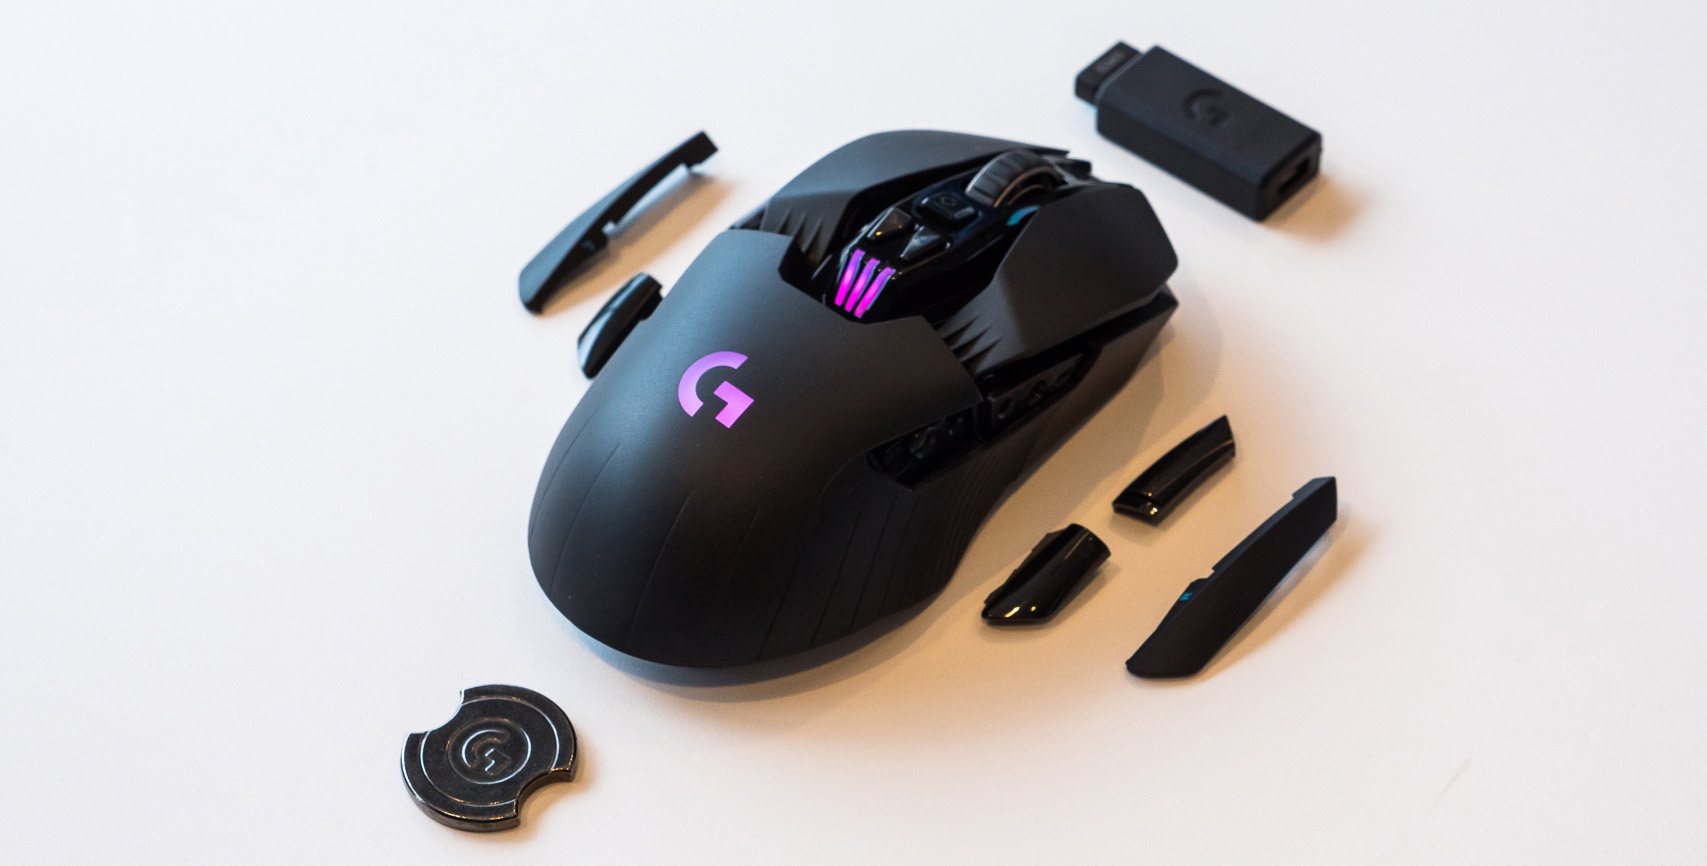 Deal of the week: save up to 33% on the Logitech G903 wireless gaming mouse  - The Loadout